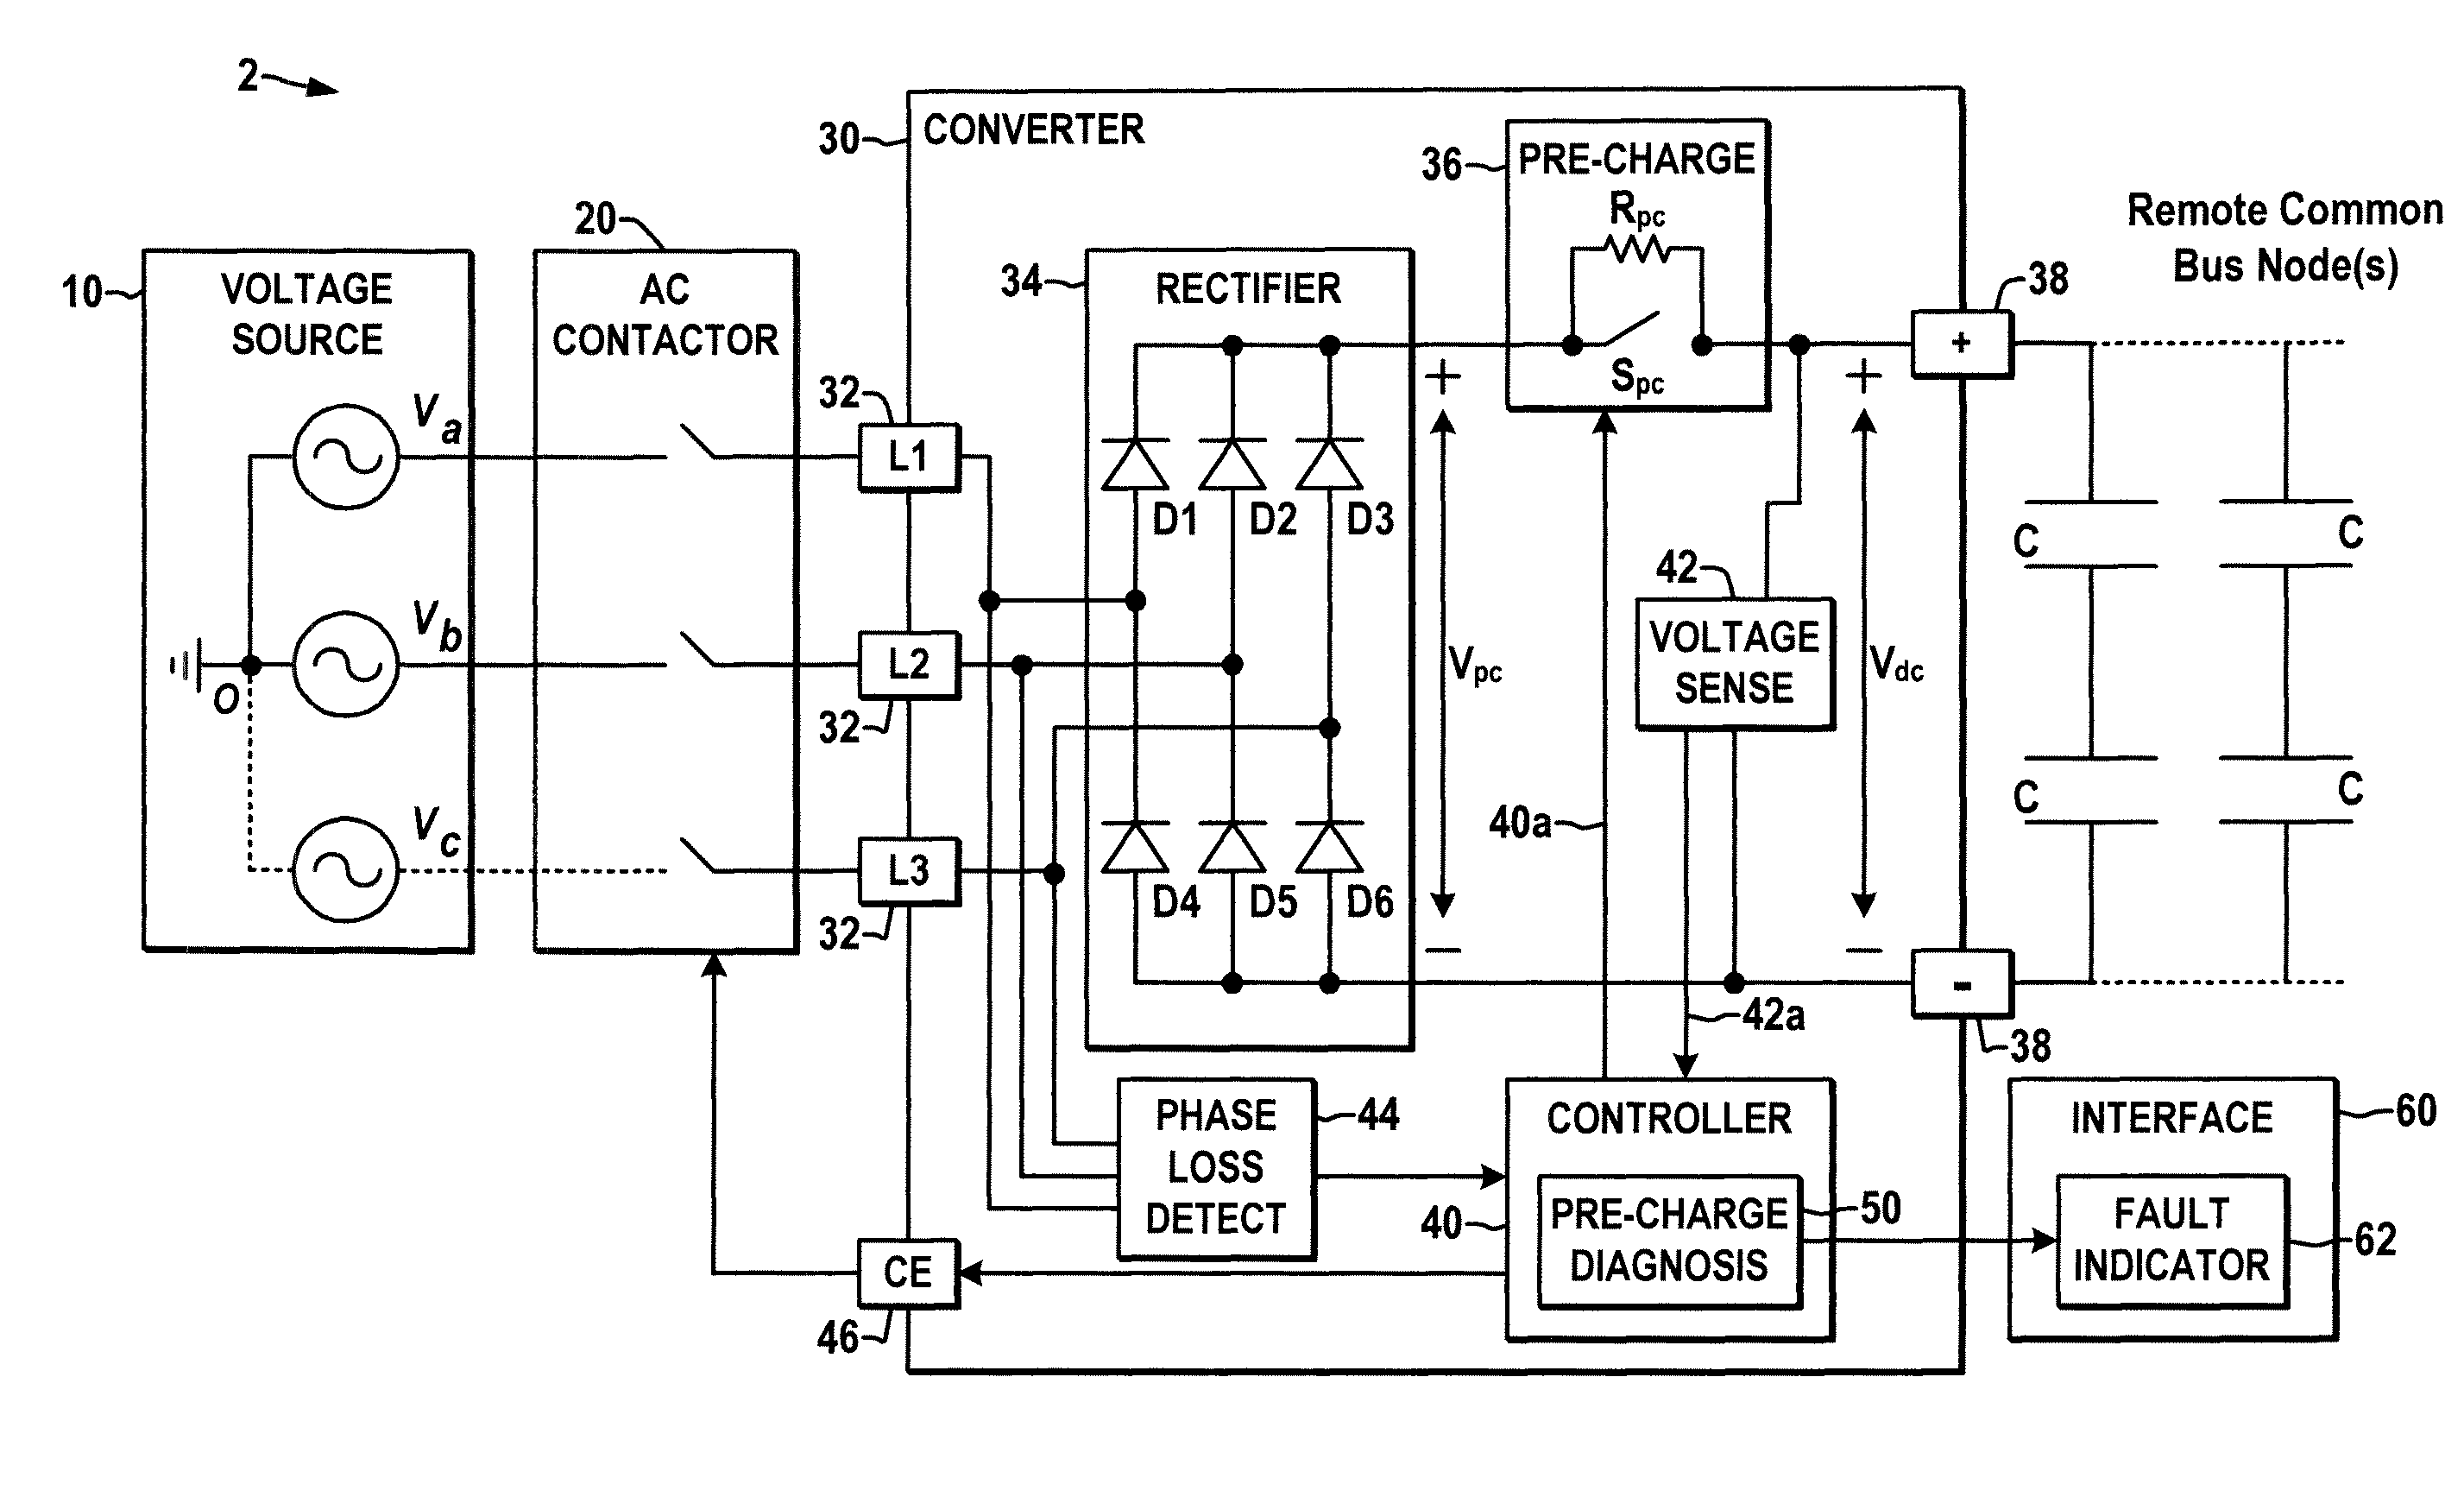 Method and apparatus for pre-charging power converters and diagnosing pre-charge faults